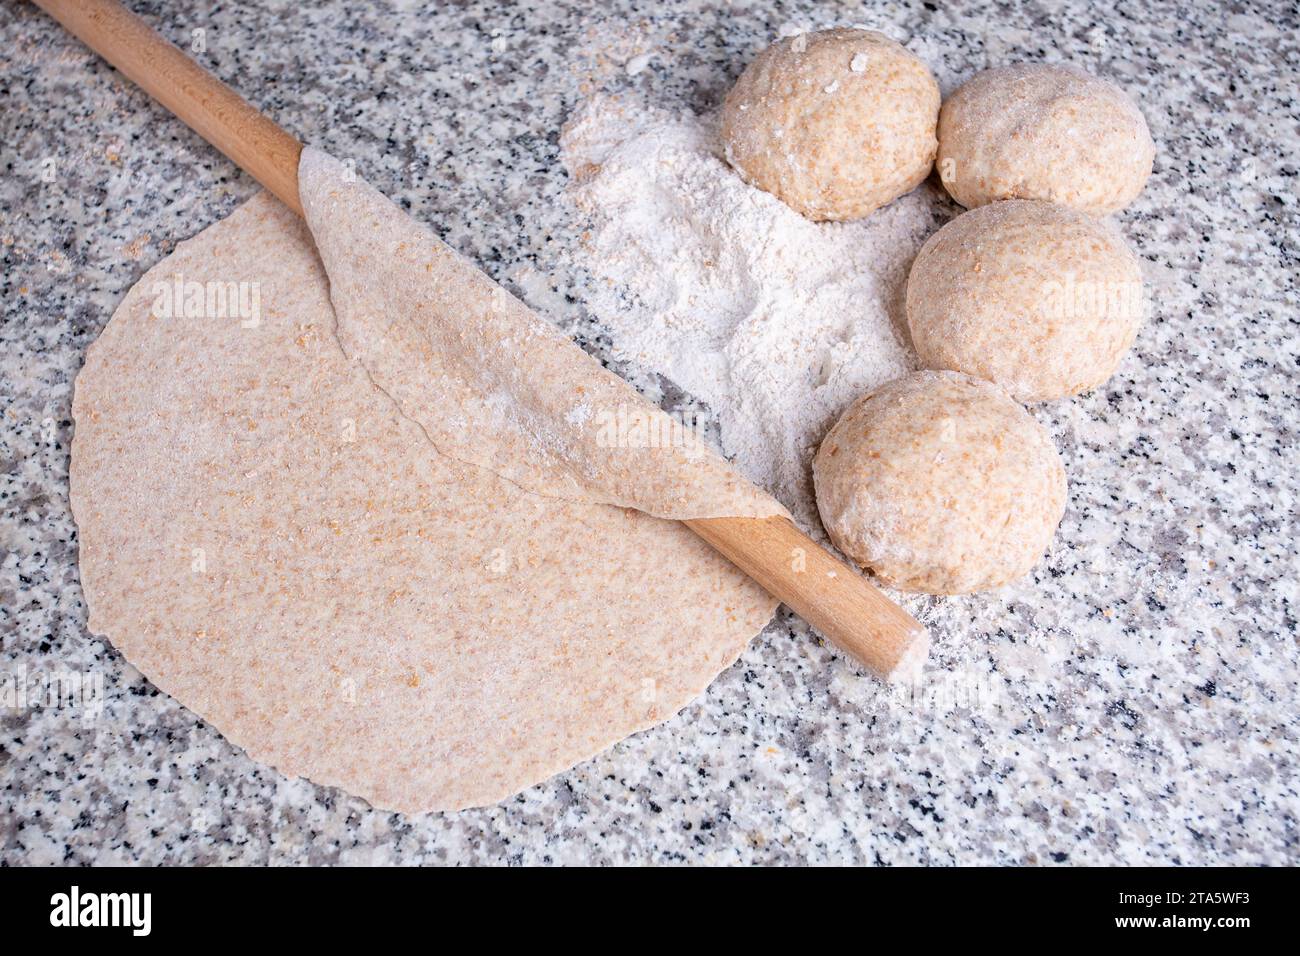 Turkish style making bread with a rolling pin, yeast dough (Turkish name; hamur acmak) Stock Photo